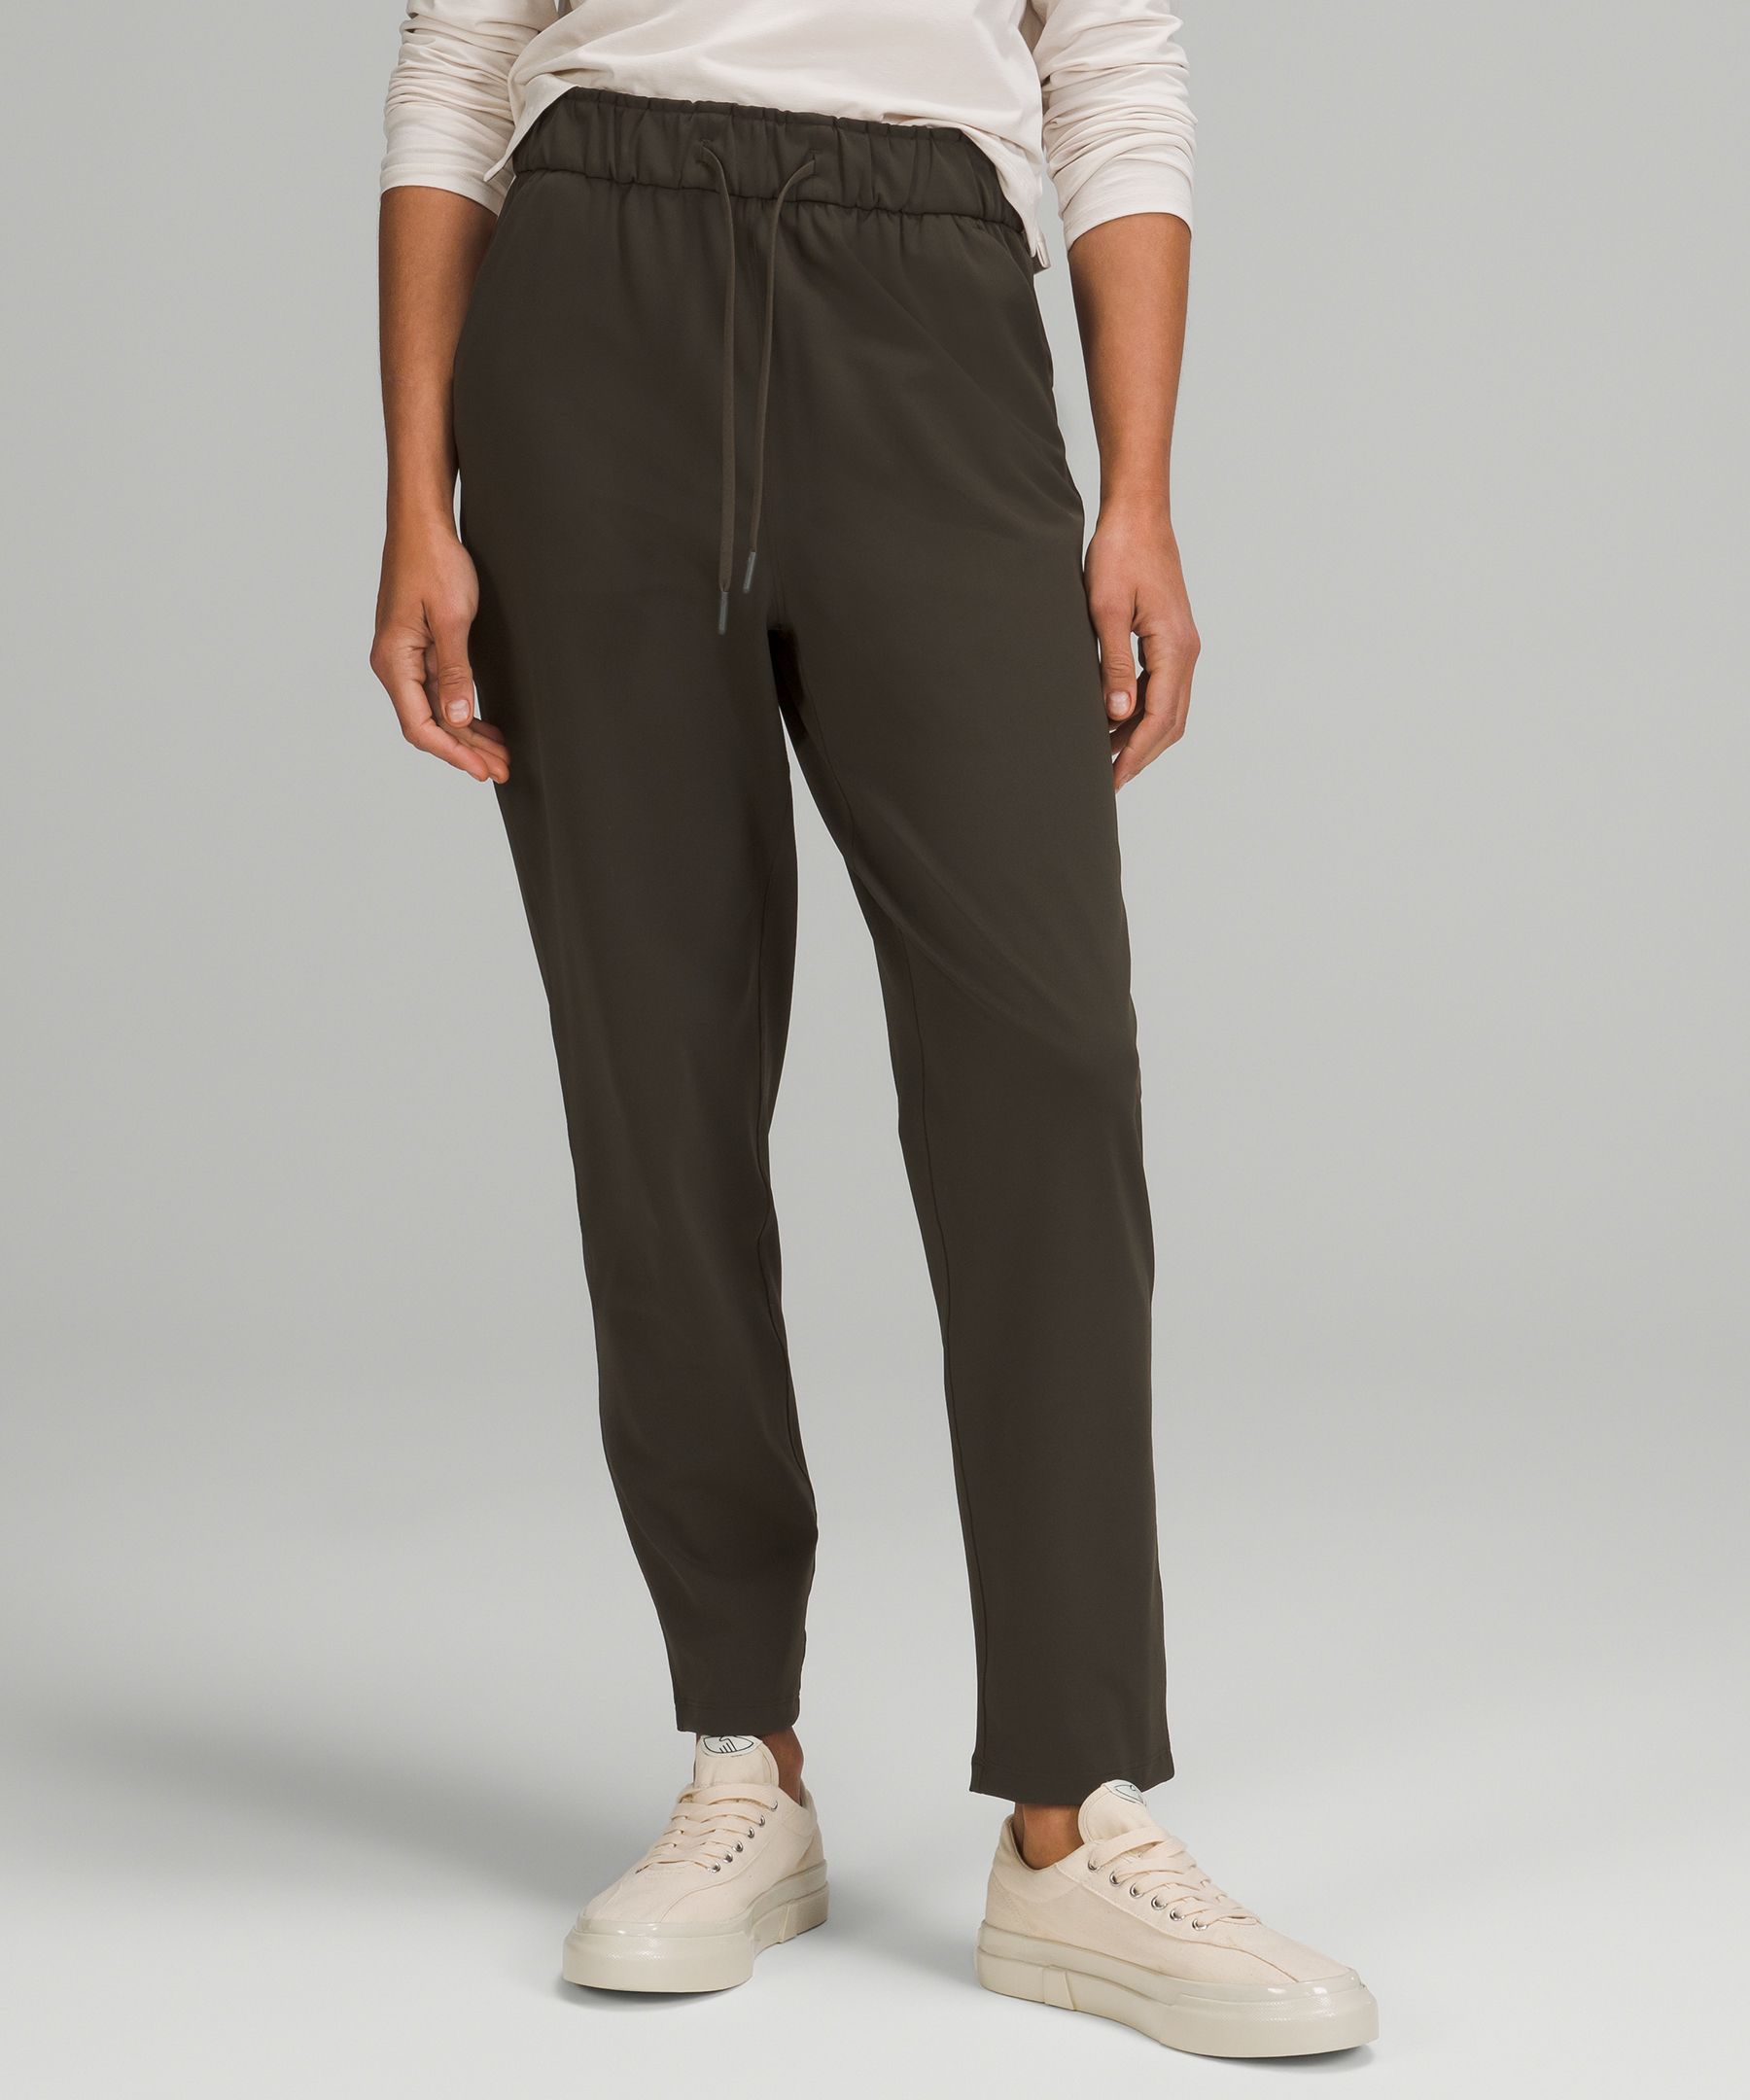 Lululemon Athletica Here To There 7/8 High Rise Pant Dark Grey